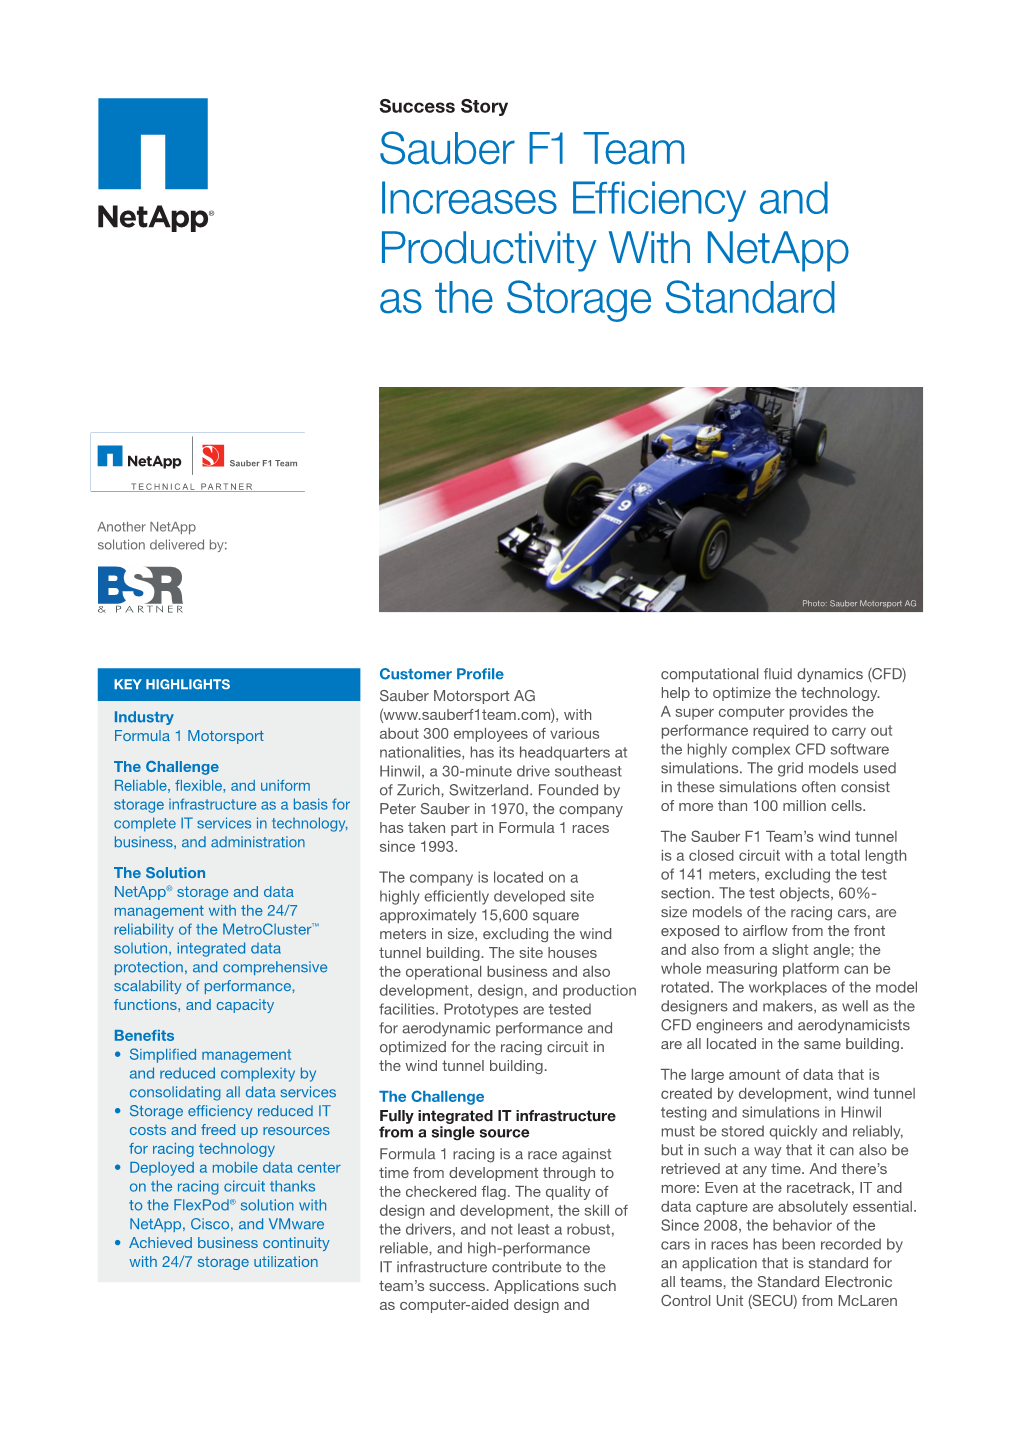 Sauber F1 Team Increases Efficiency and Productivity with Netapp As the Storage Standard